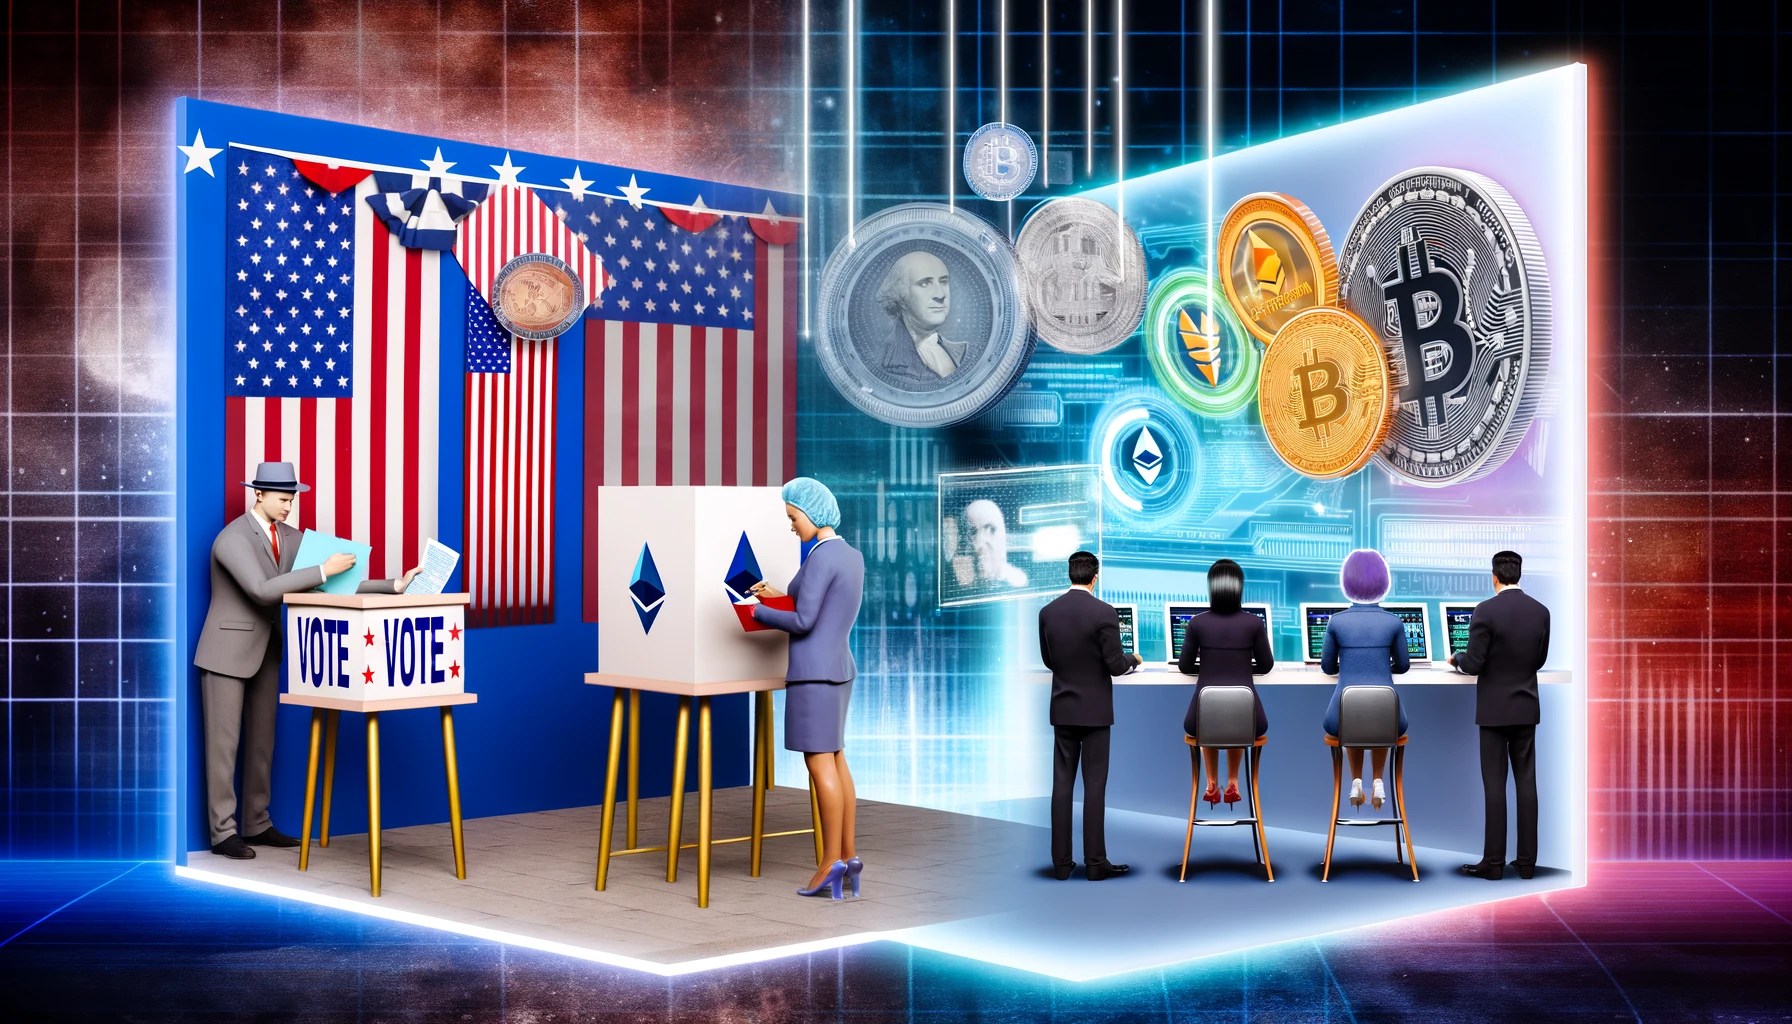 Cardano Founder Reveals What Will Decide The Winner In The US Presidential Elections